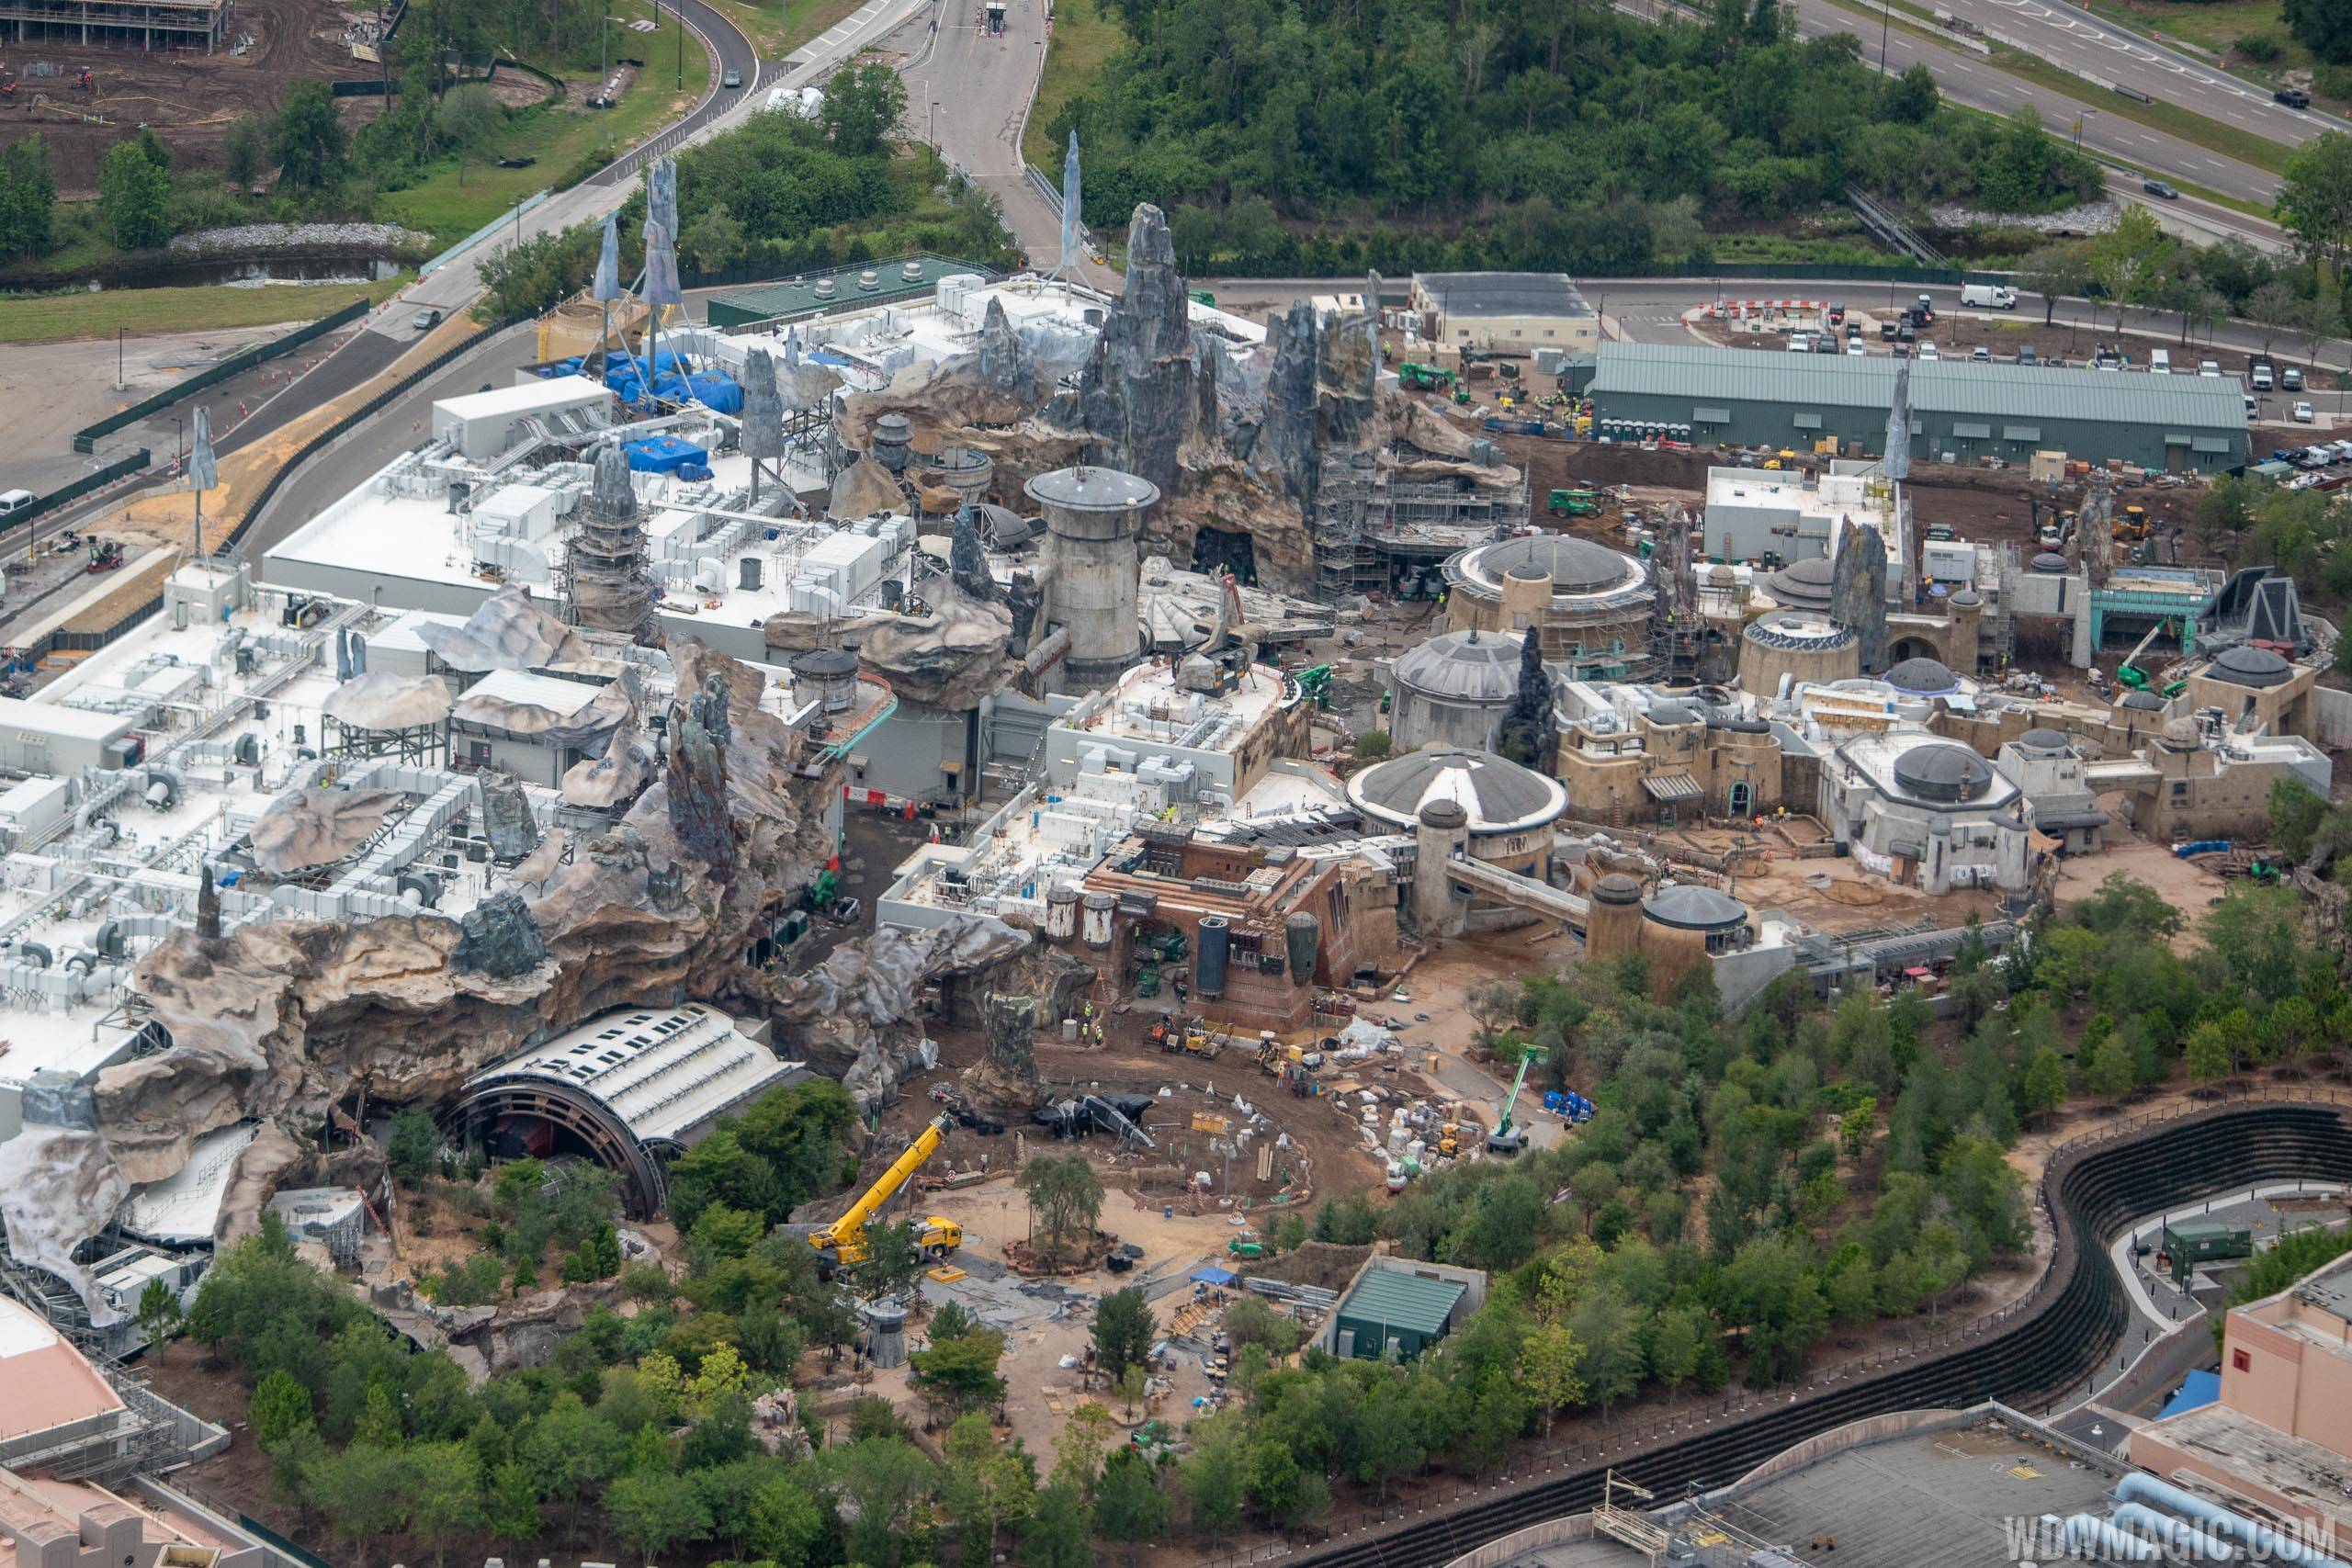 PHOTOS - Latest Star Wars Galaxy's Edge aerial construction pictures from Disney's Hollywood Studios